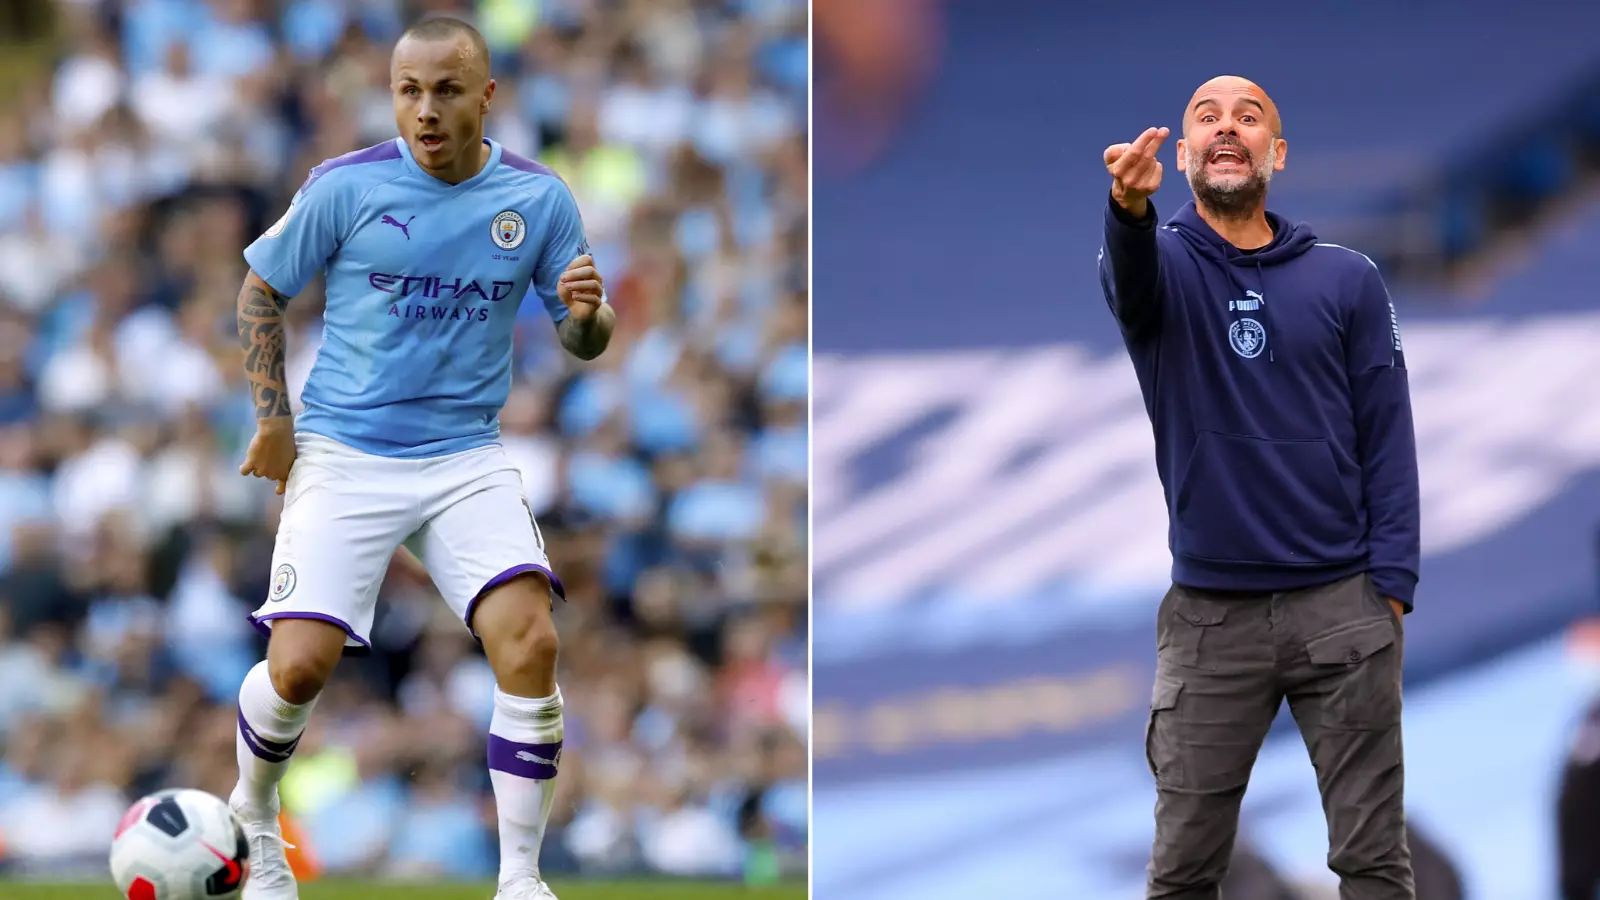 Manchester City On-Loan Defender Angelino Throws Shade On Instagram Over Lack Of Playing Time